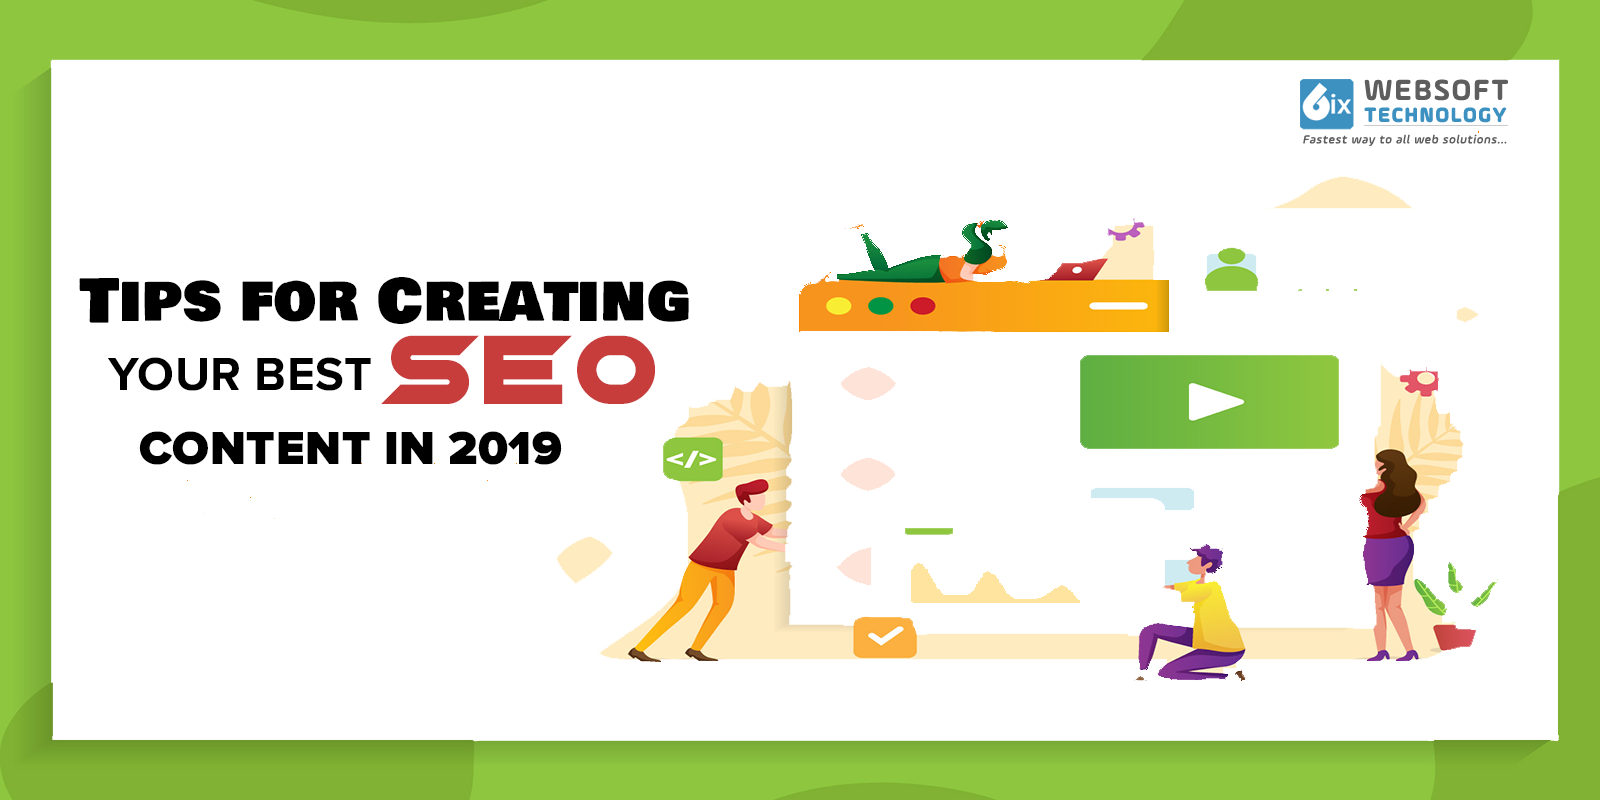 How Should You Plan for the SEO Content Creation for the Year 2019